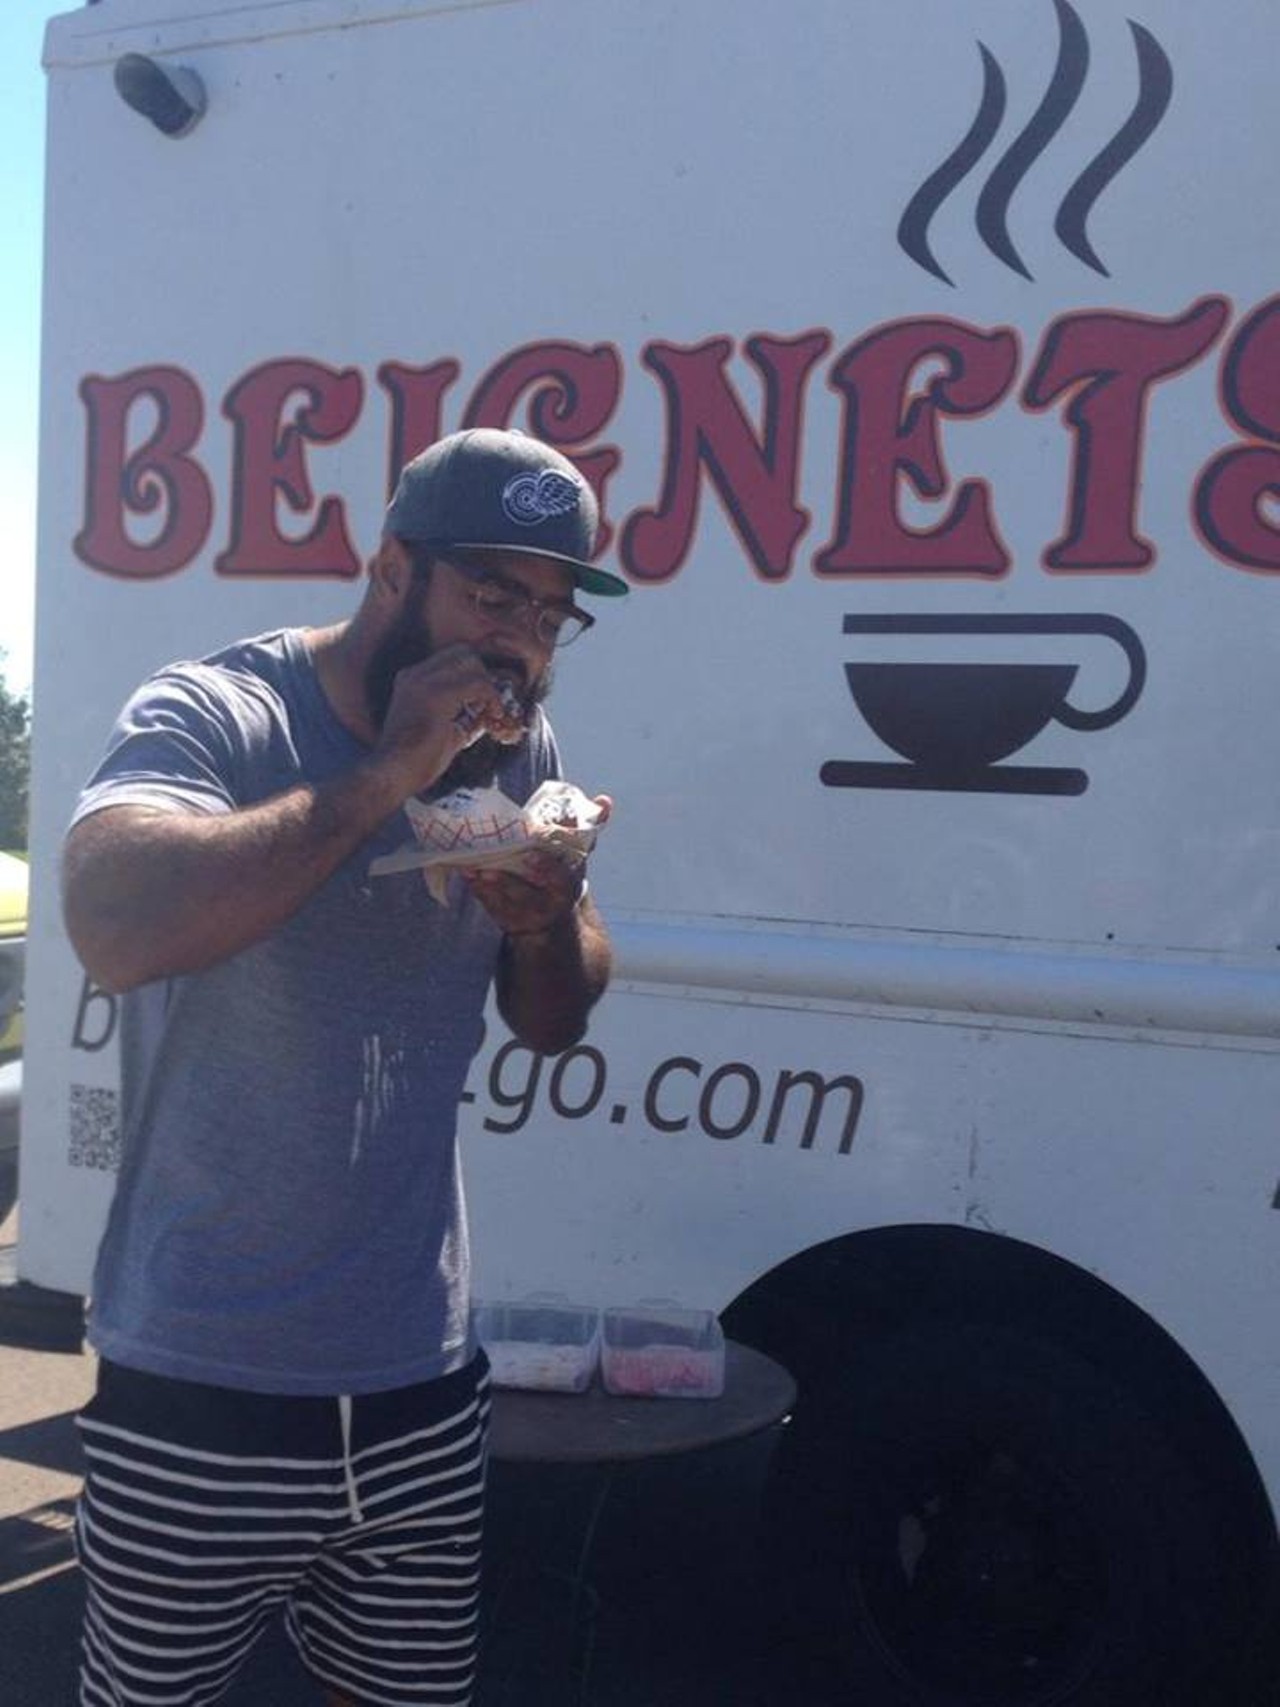 Beignet Truck
It's hard to leave Eastern Market without grabbing one of these delicious French pastries, as evidenced by Detroit Lions linebacker DeAndre Levy (pictured here). (Photo via Facebook)